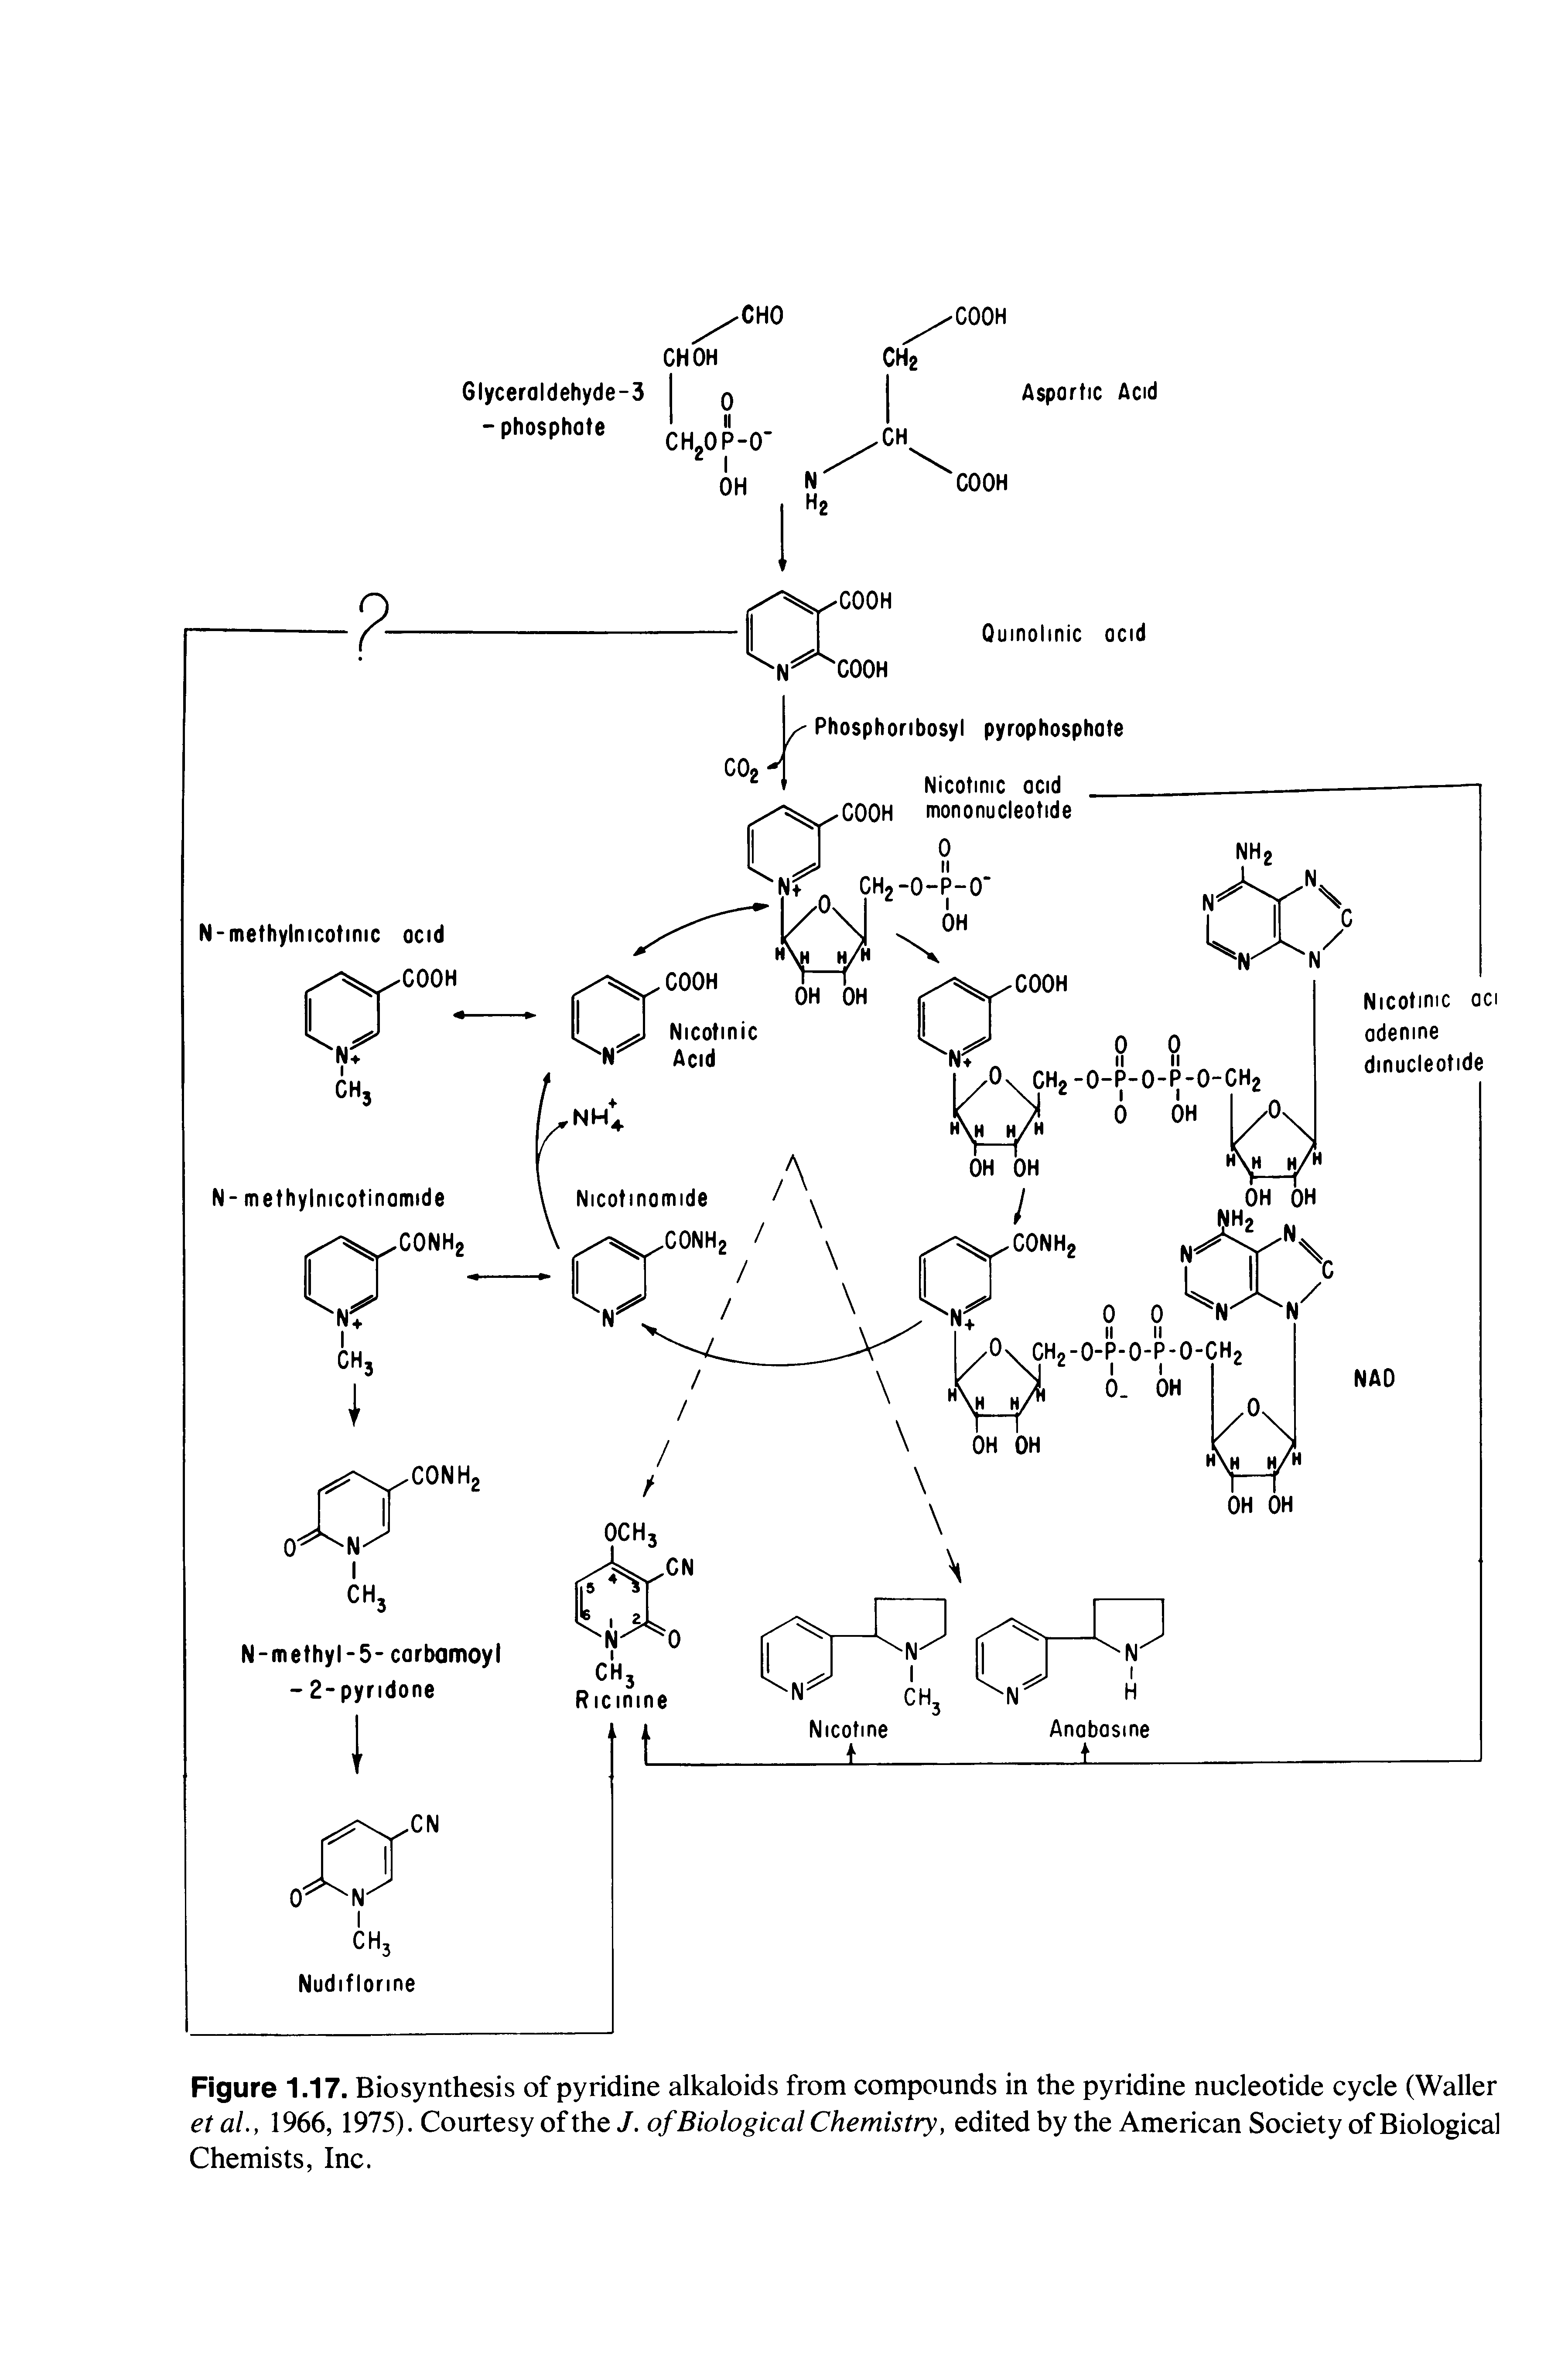 Figure 1.17. Biosynthesis of pyridine alkaloids from compounds in the pyridine nucleotide cycle (Waller et ai, 1966, 1975). Courtesy of the J. of Biological Chemistry, edited by the American Society of Biological Chemists, Inc.